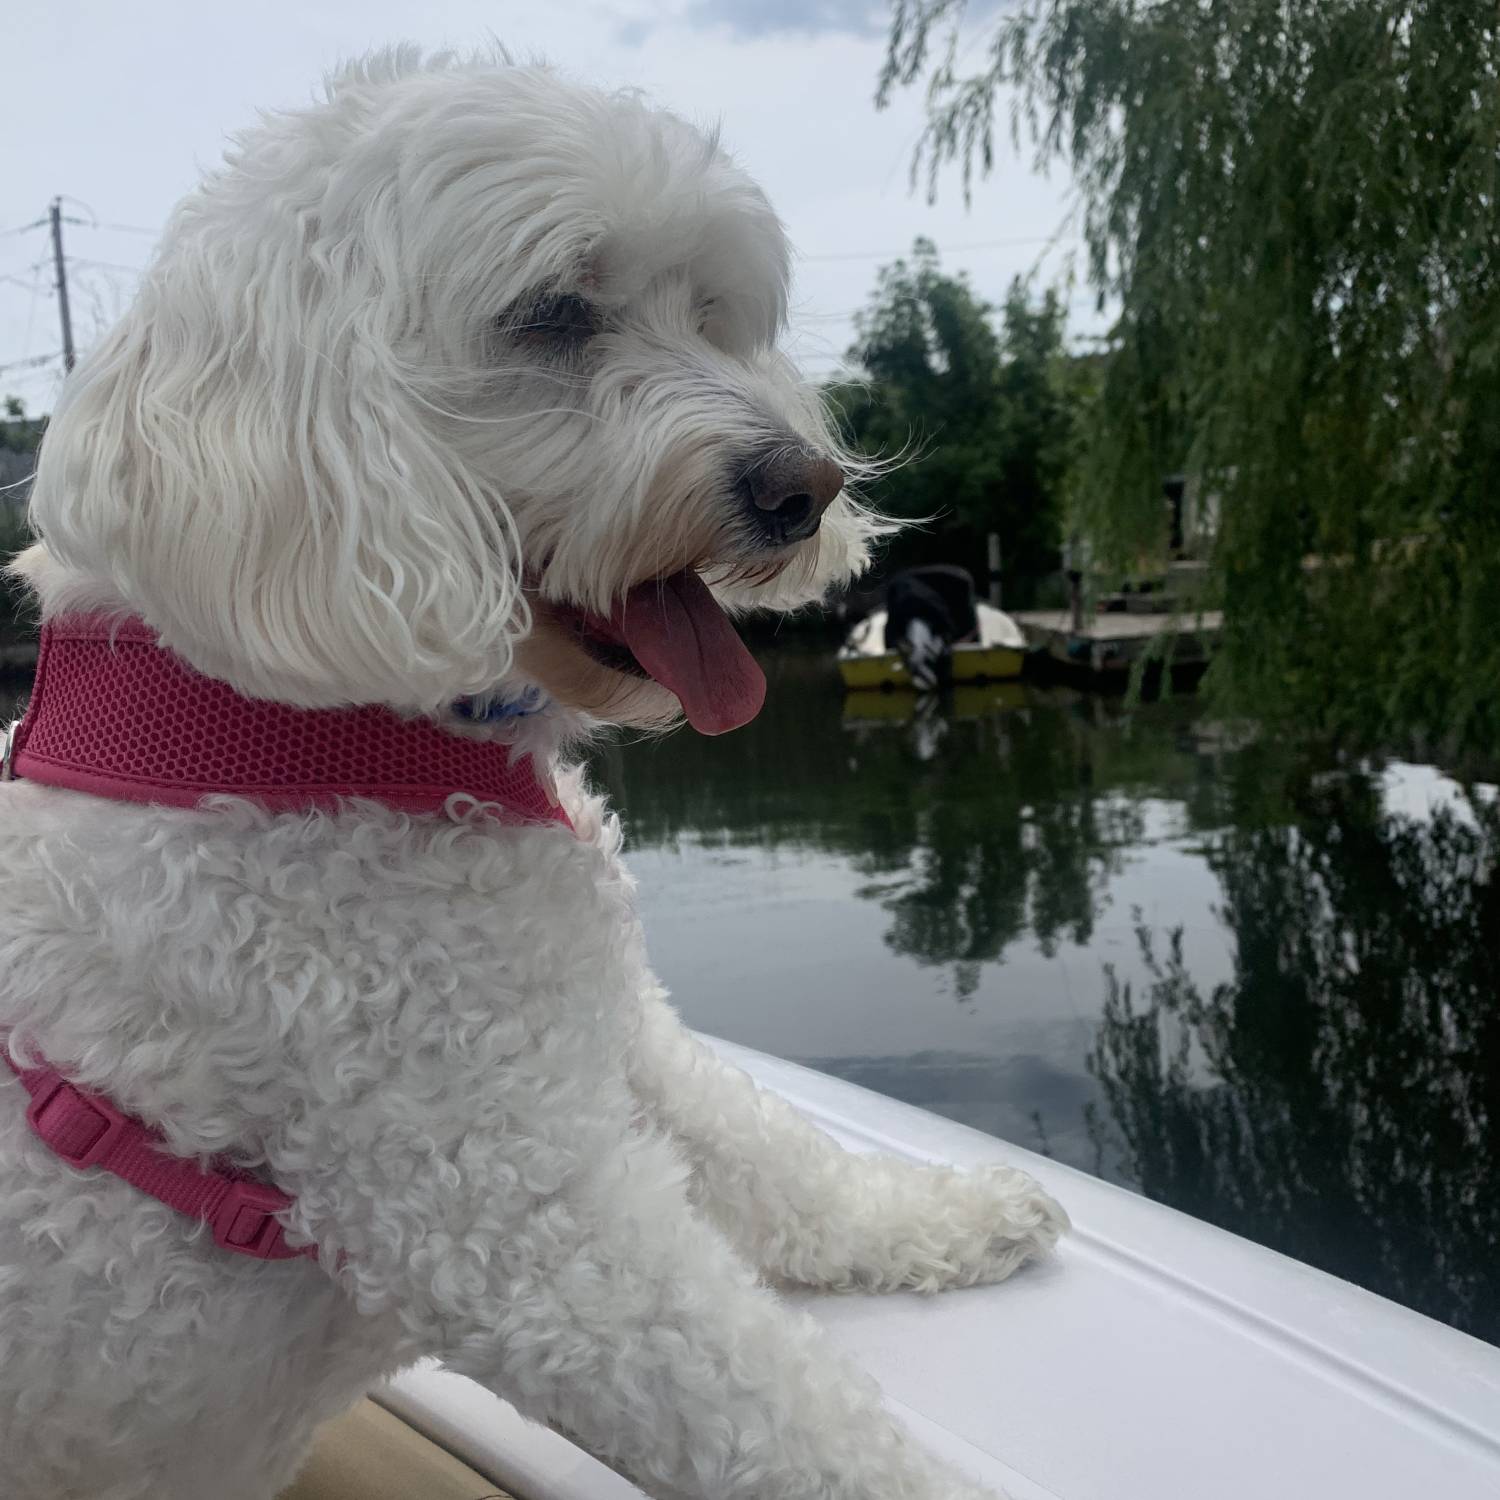 Title: Bella looking over the gunwale ! - On board their Sportsman Open 232 Center Console - Location: Greene’s Creek Sayville NY. Participating in the Photo Contest #SportsmanSeptember